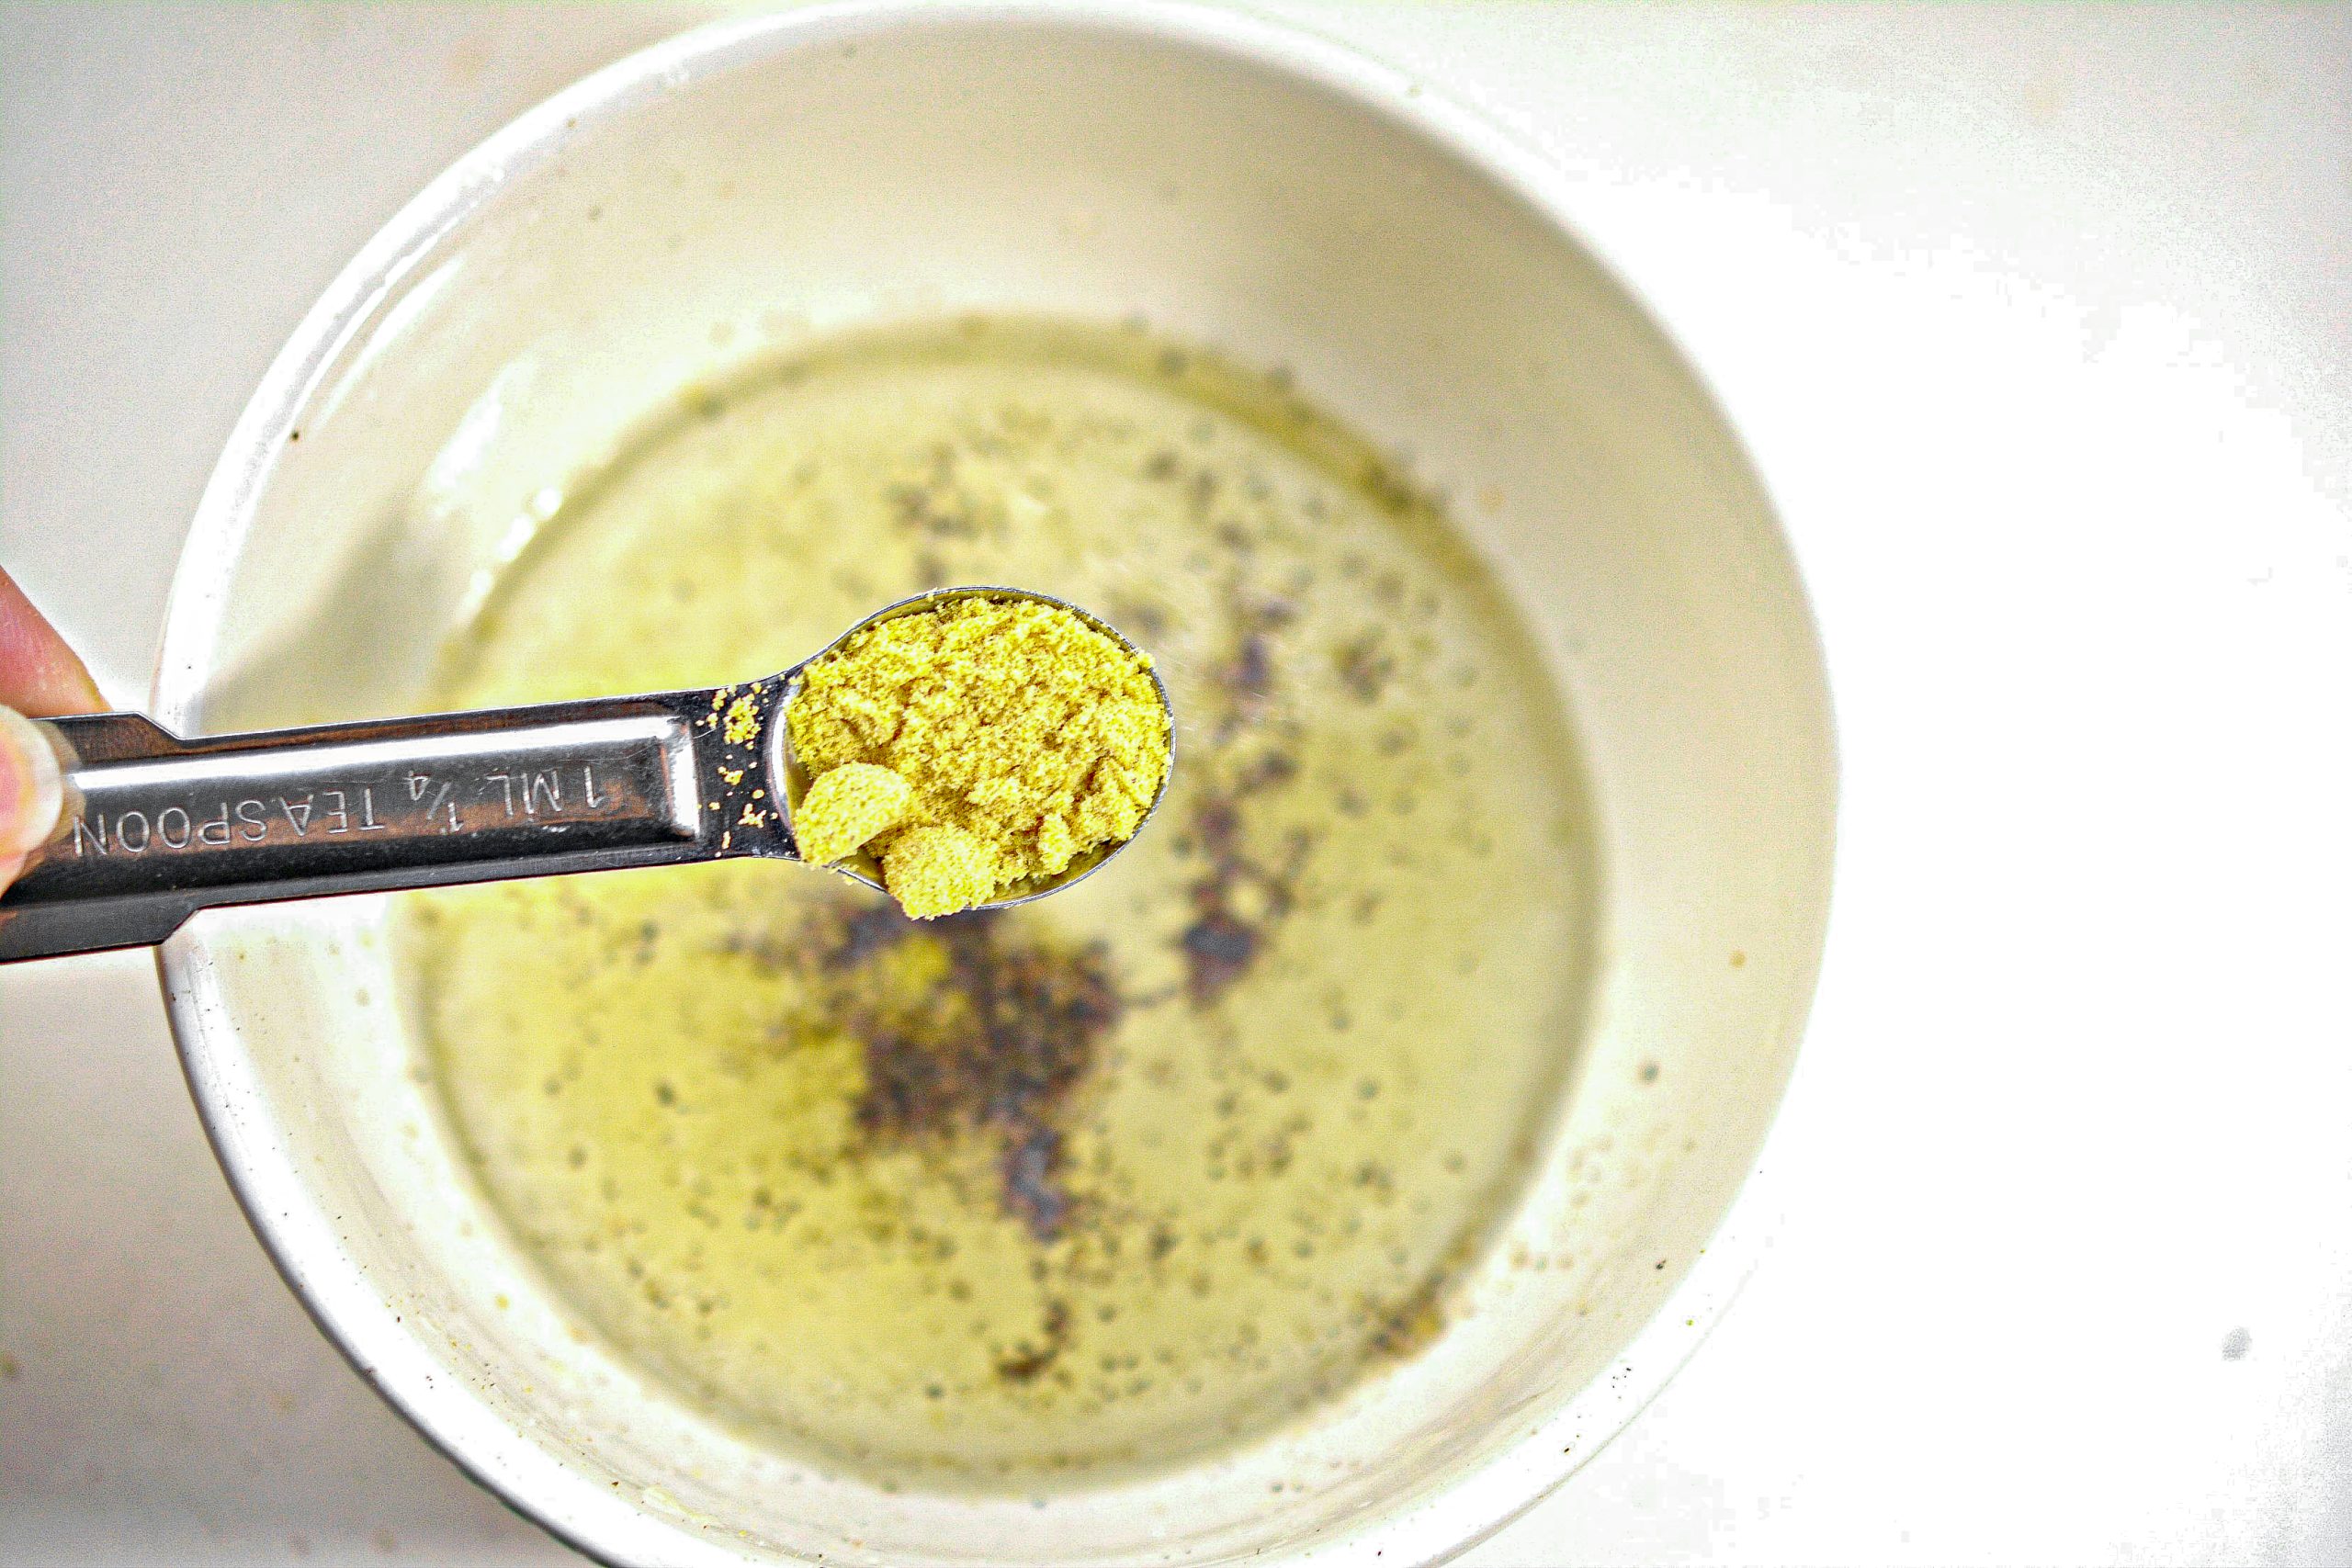 In a small bowl, whisk together the olive oil, lemon juice, ground mustard and salt and pepper to taste.